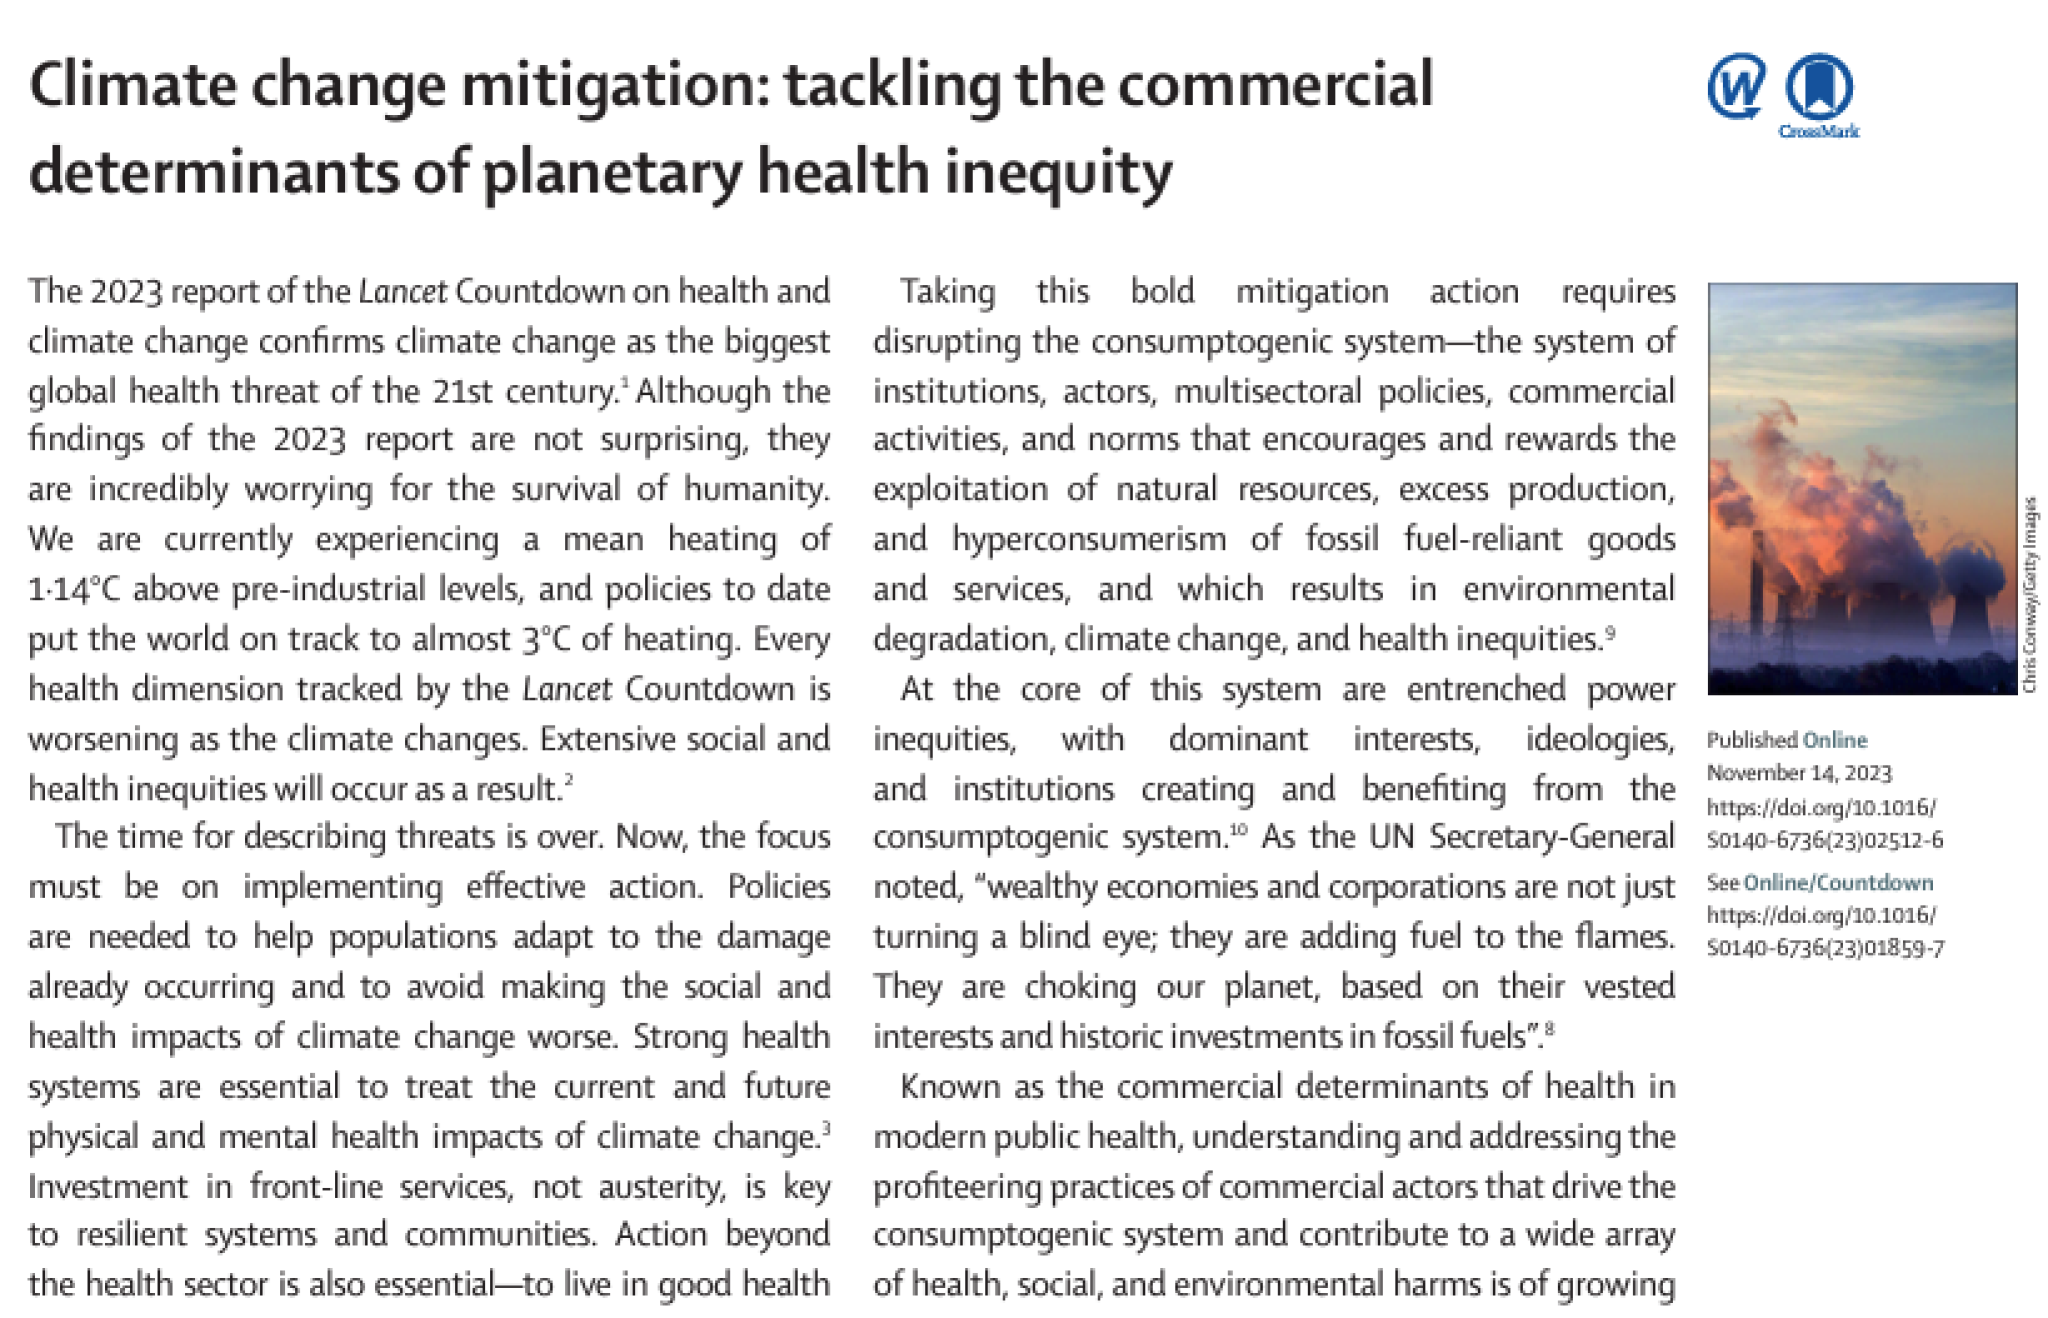 Climate change mitigation. Tackling the commercial determinants of planetary health equity